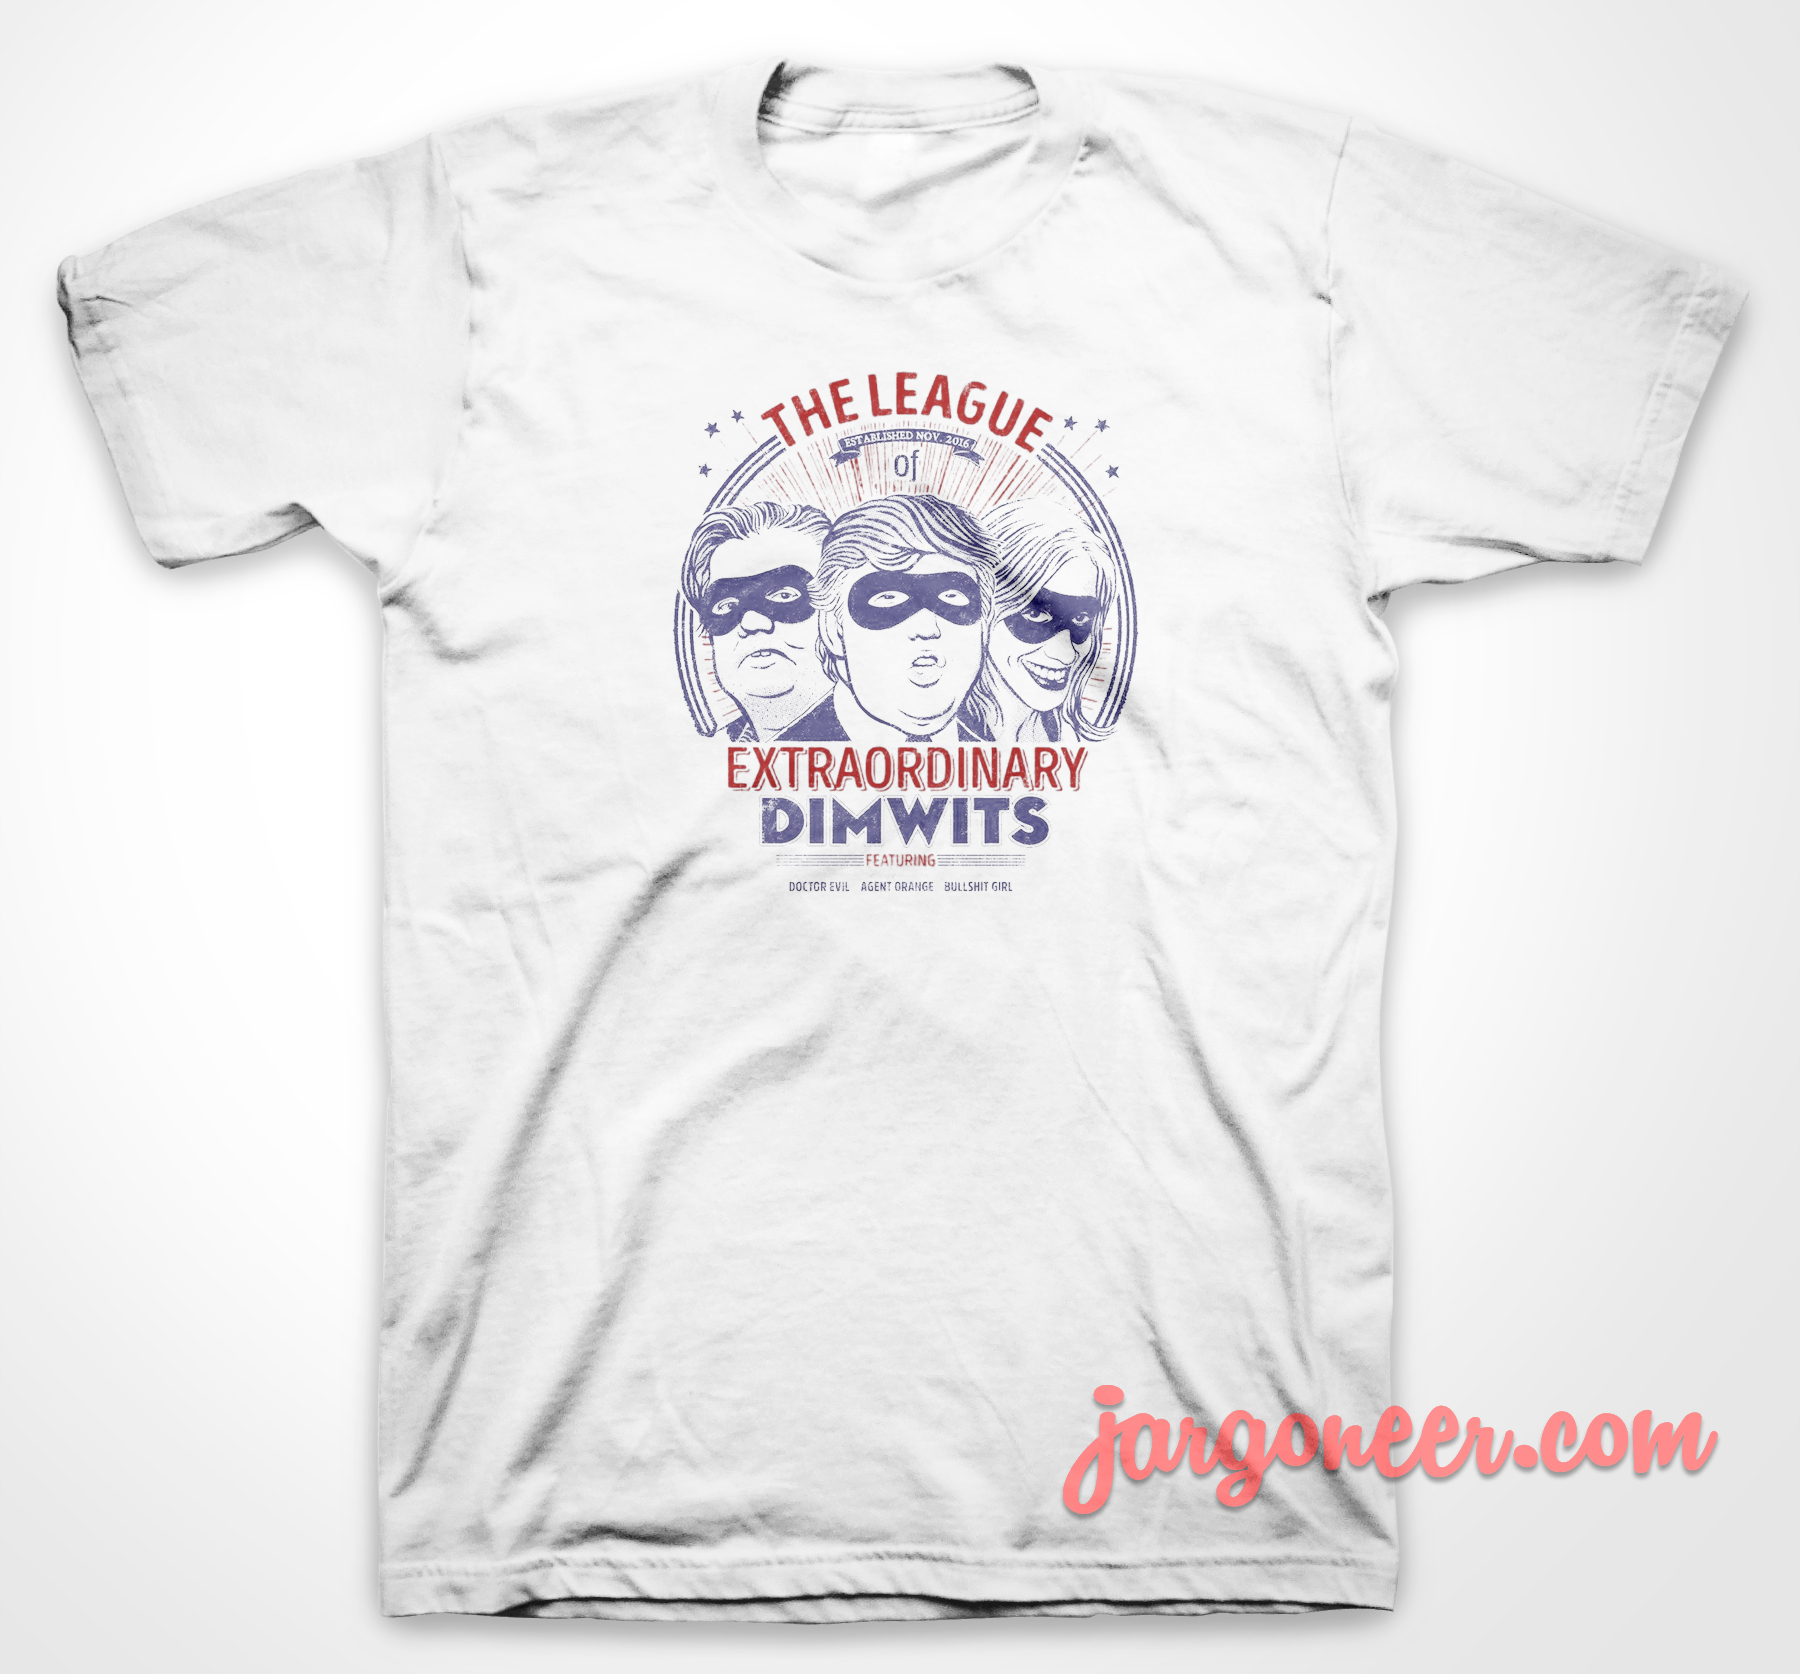 The Extraordinary Dimwits - Shop Unique Graphic Cool Shirt Designs